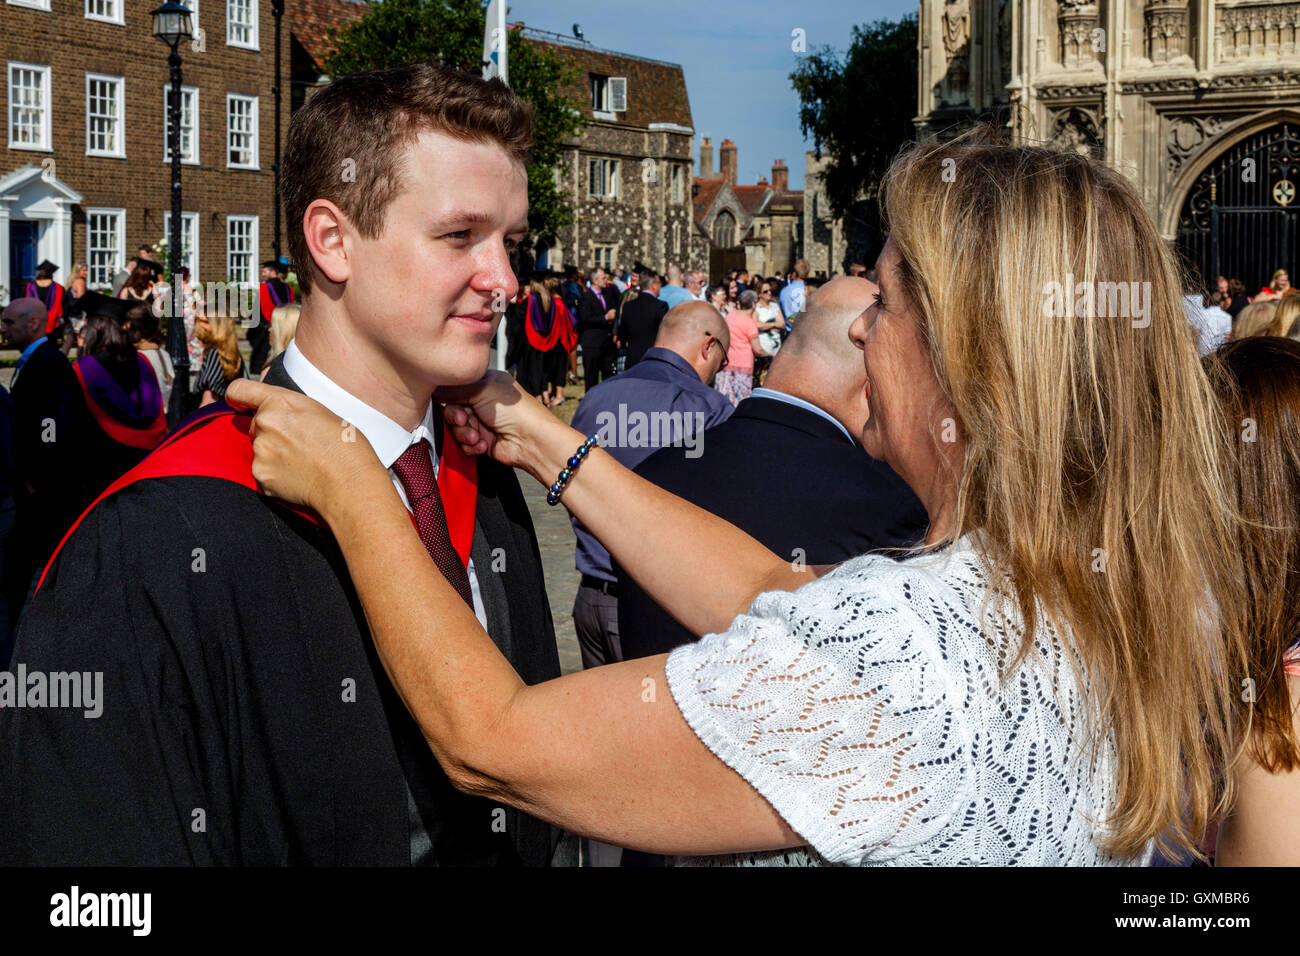 A Proud Mother With Her Graduate Son At A University Graduation Ceremony, Canterbury Cathedral, Canterbury, Kent, UK Stock Photo